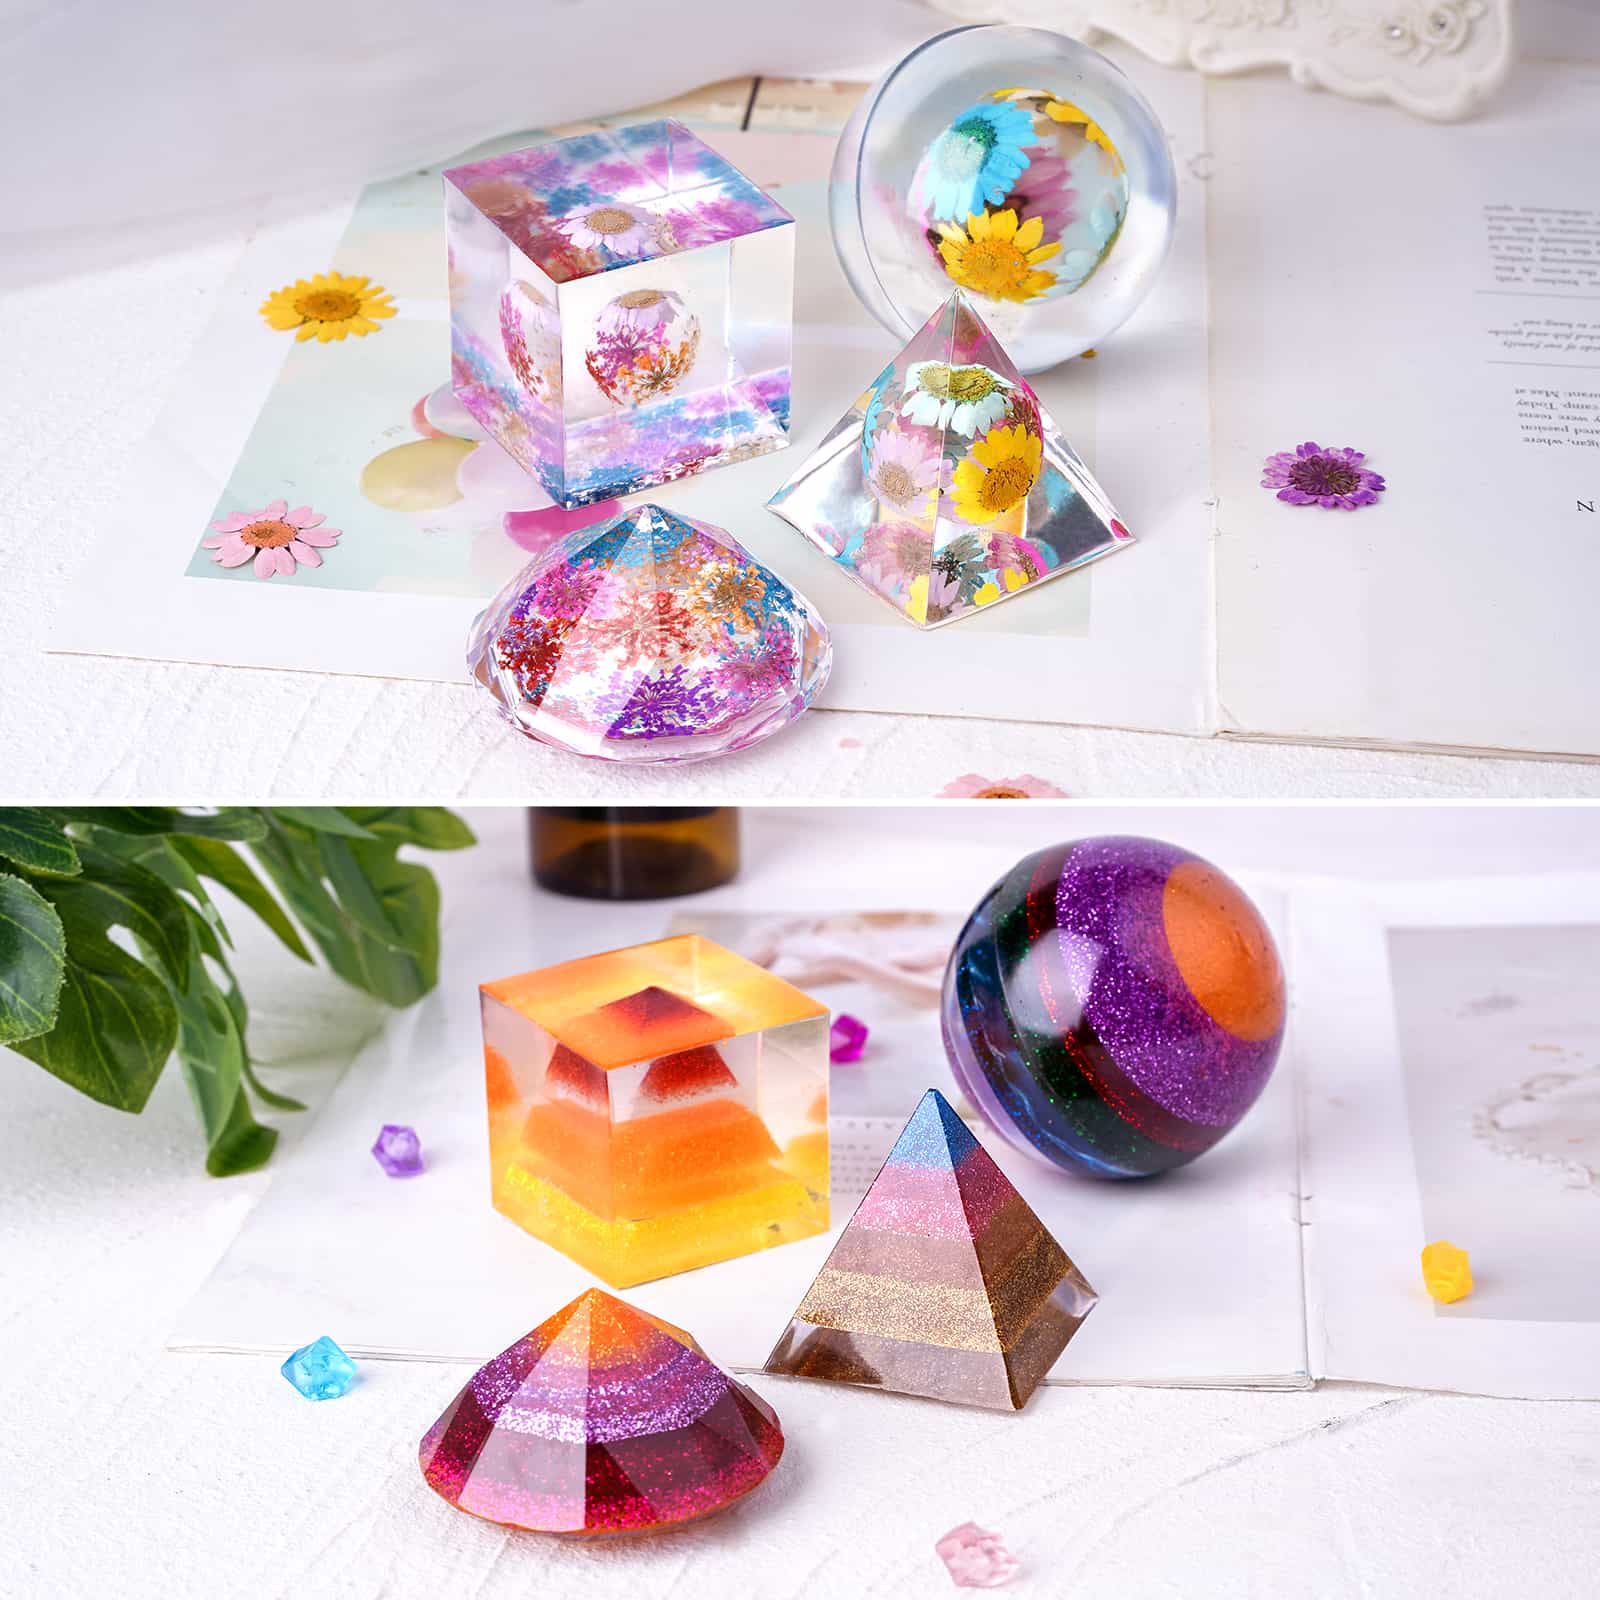  LET'S RESIN Resin Kit for Beginners,30oz Resin Starter Kit with  Coaster Molds,Silicone Sphere Molds Set, Dried Flowers, Foil Flakes,Resin  Cups,Resin Craft Kit for Casting : Arts, Crafts & Sewing